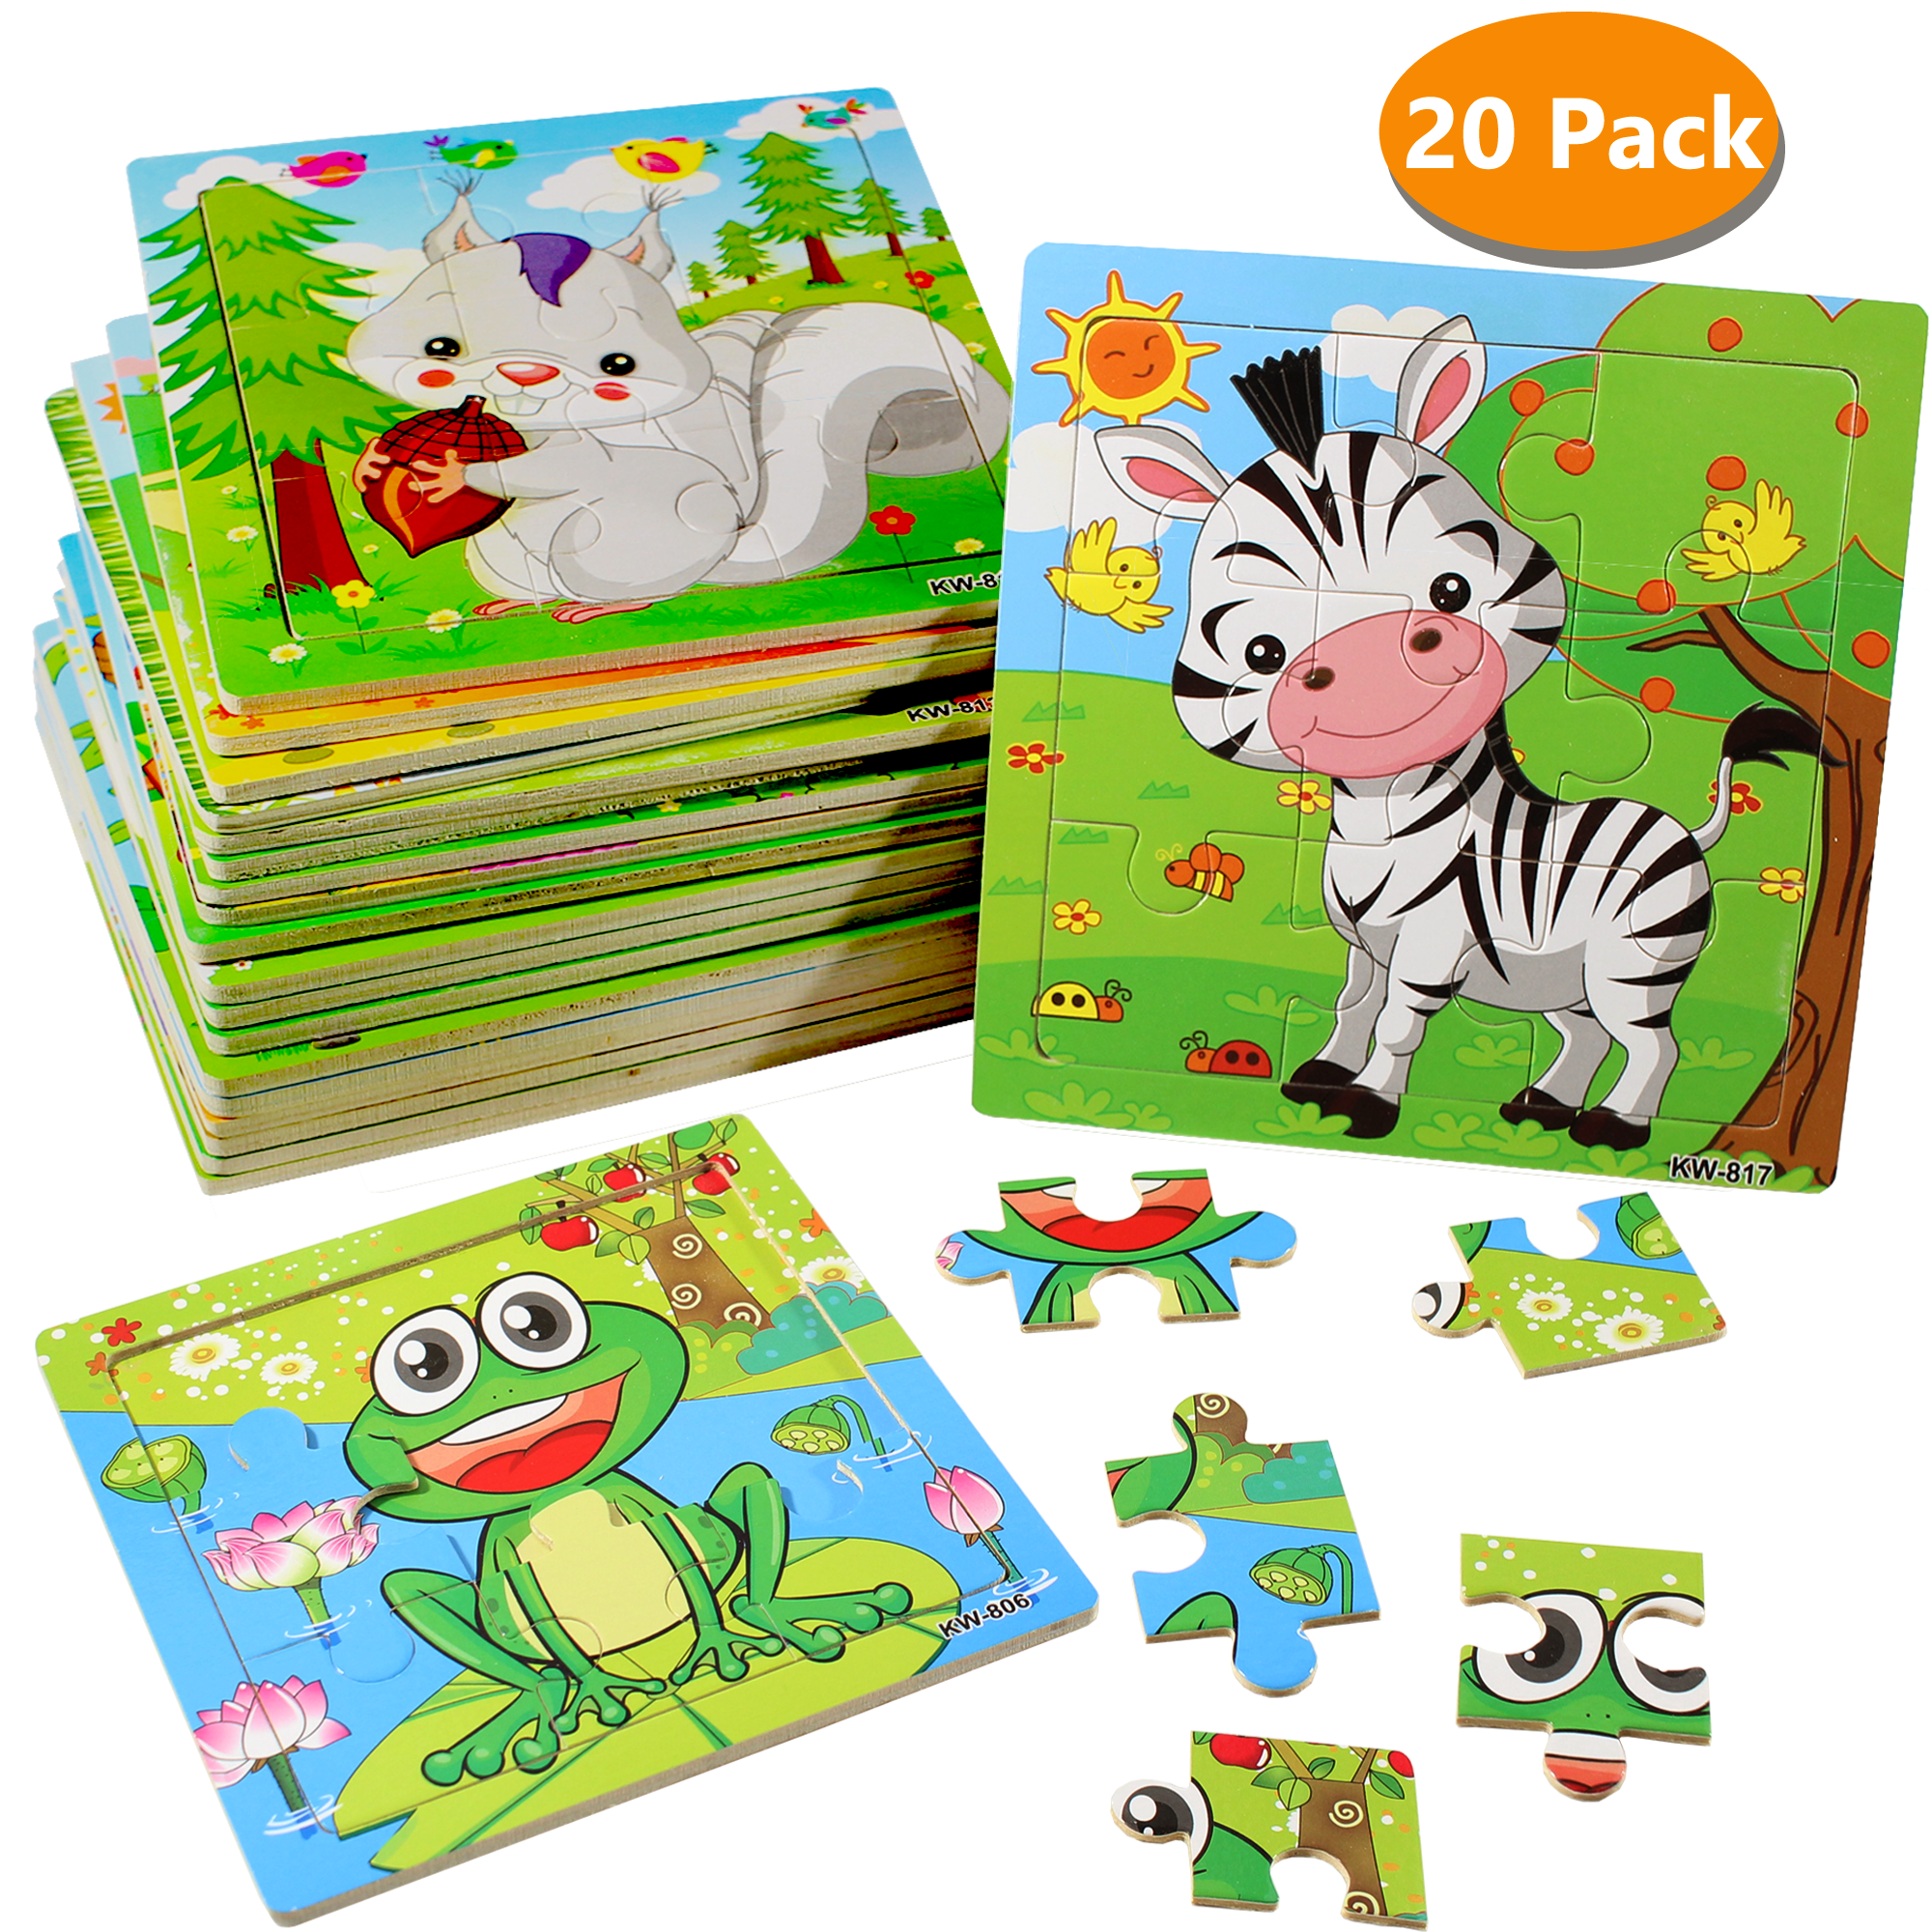 6 Puzzles Aitey Wooden Jigsaw Puzzles for Kids Ages 2-5 Toddler Puzzles 9 Pieces Preschool Educational Learning Toys Set Animals Puzzles for 2 3 4 Years Old Boys and Girls 